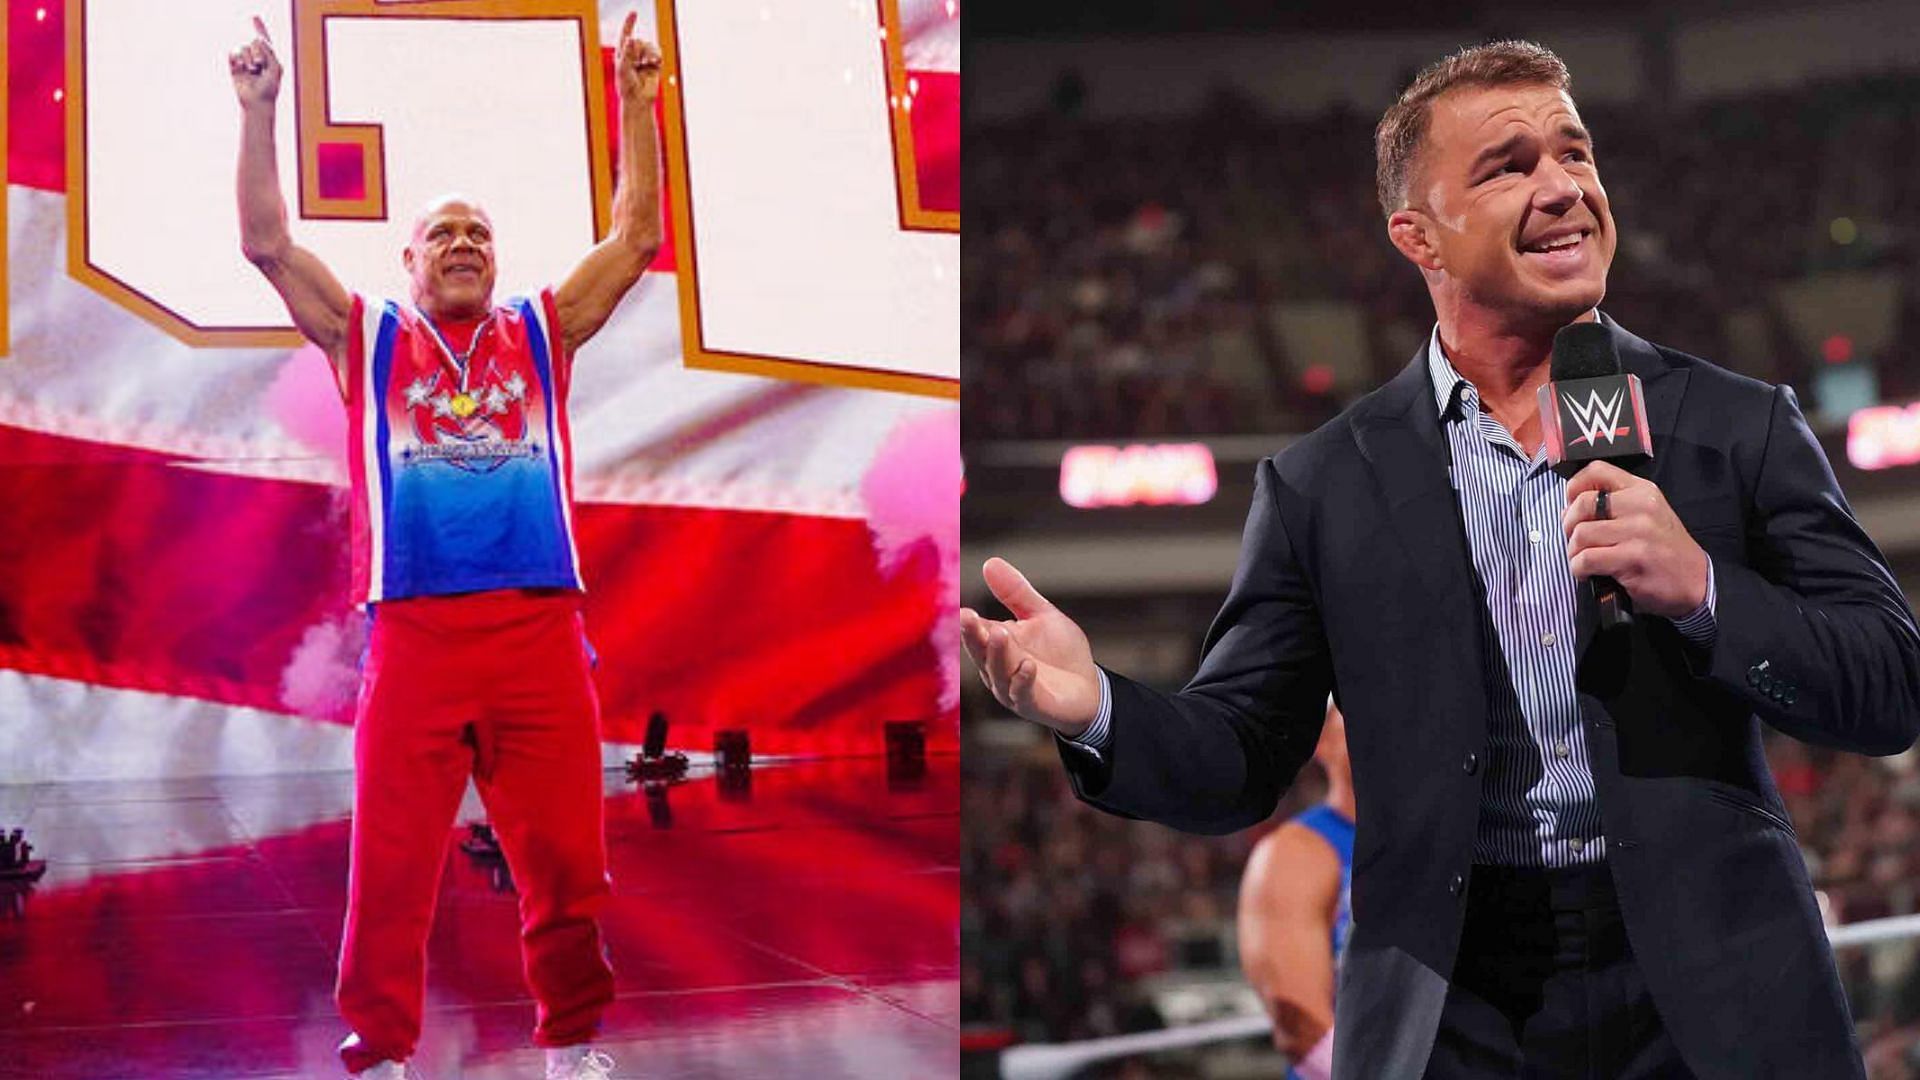 The Olympic Hero has expressed interest in managing Chad Gable